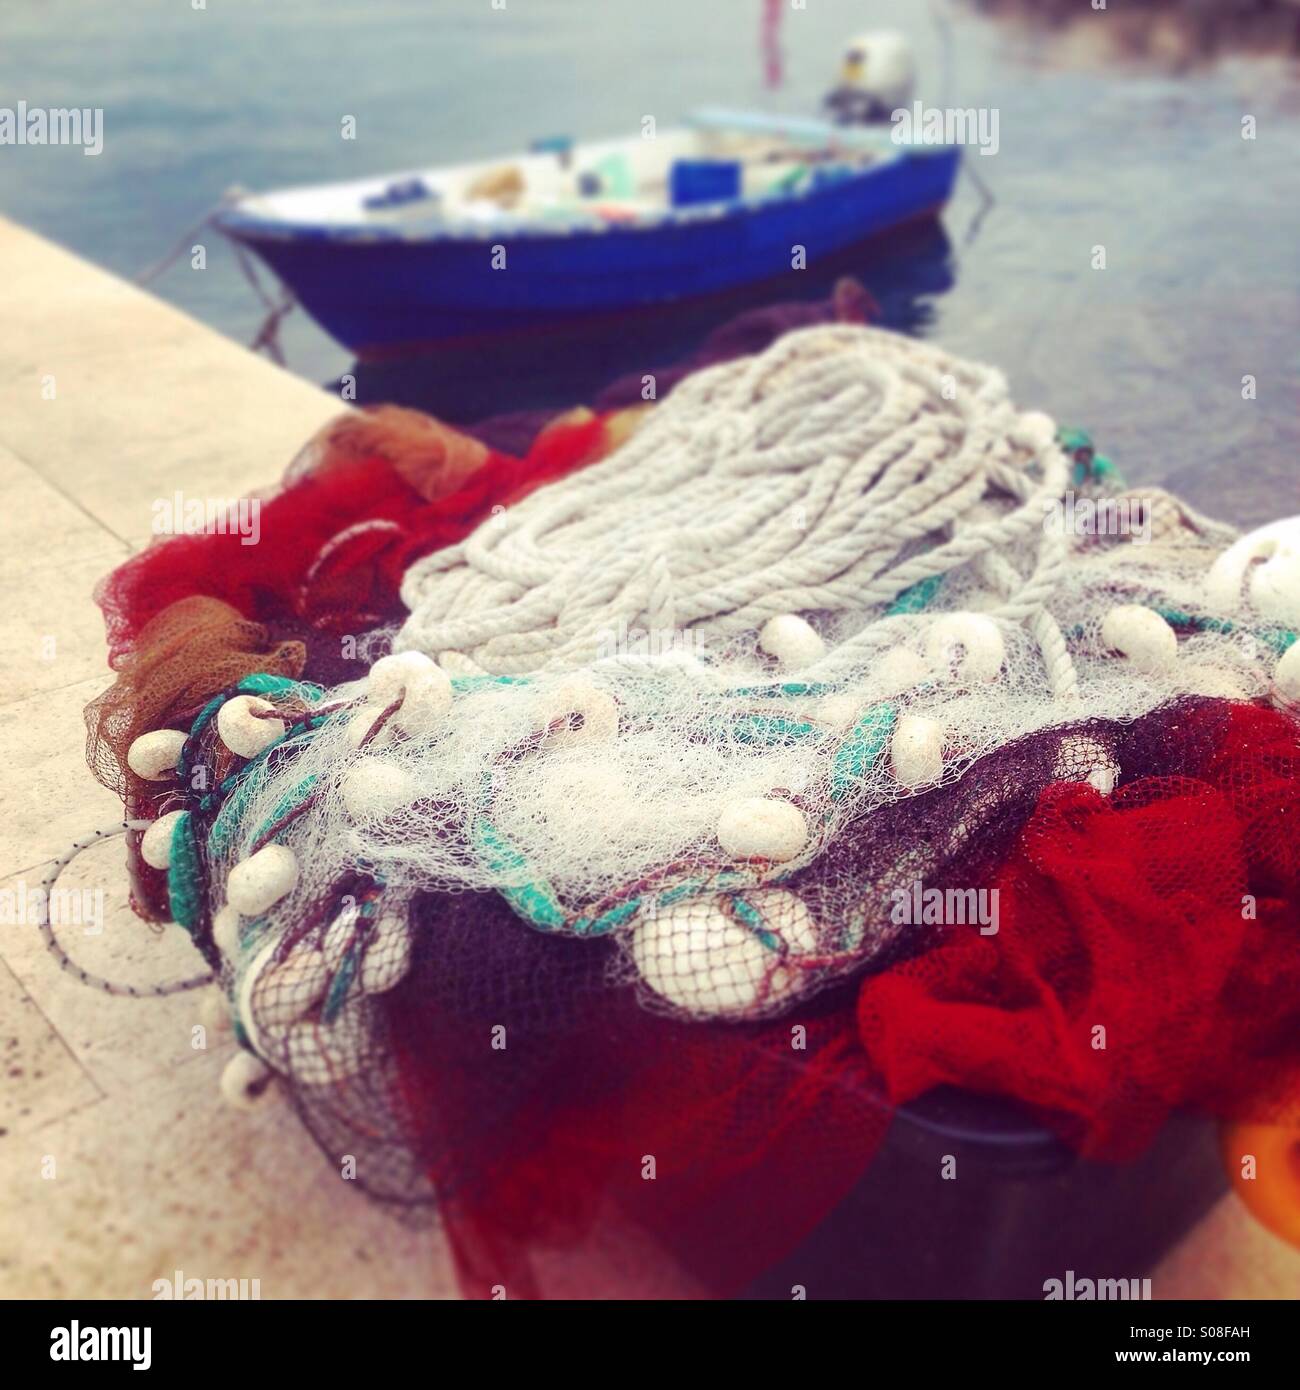 Fishing net with small boat in blurred background Stock Photo